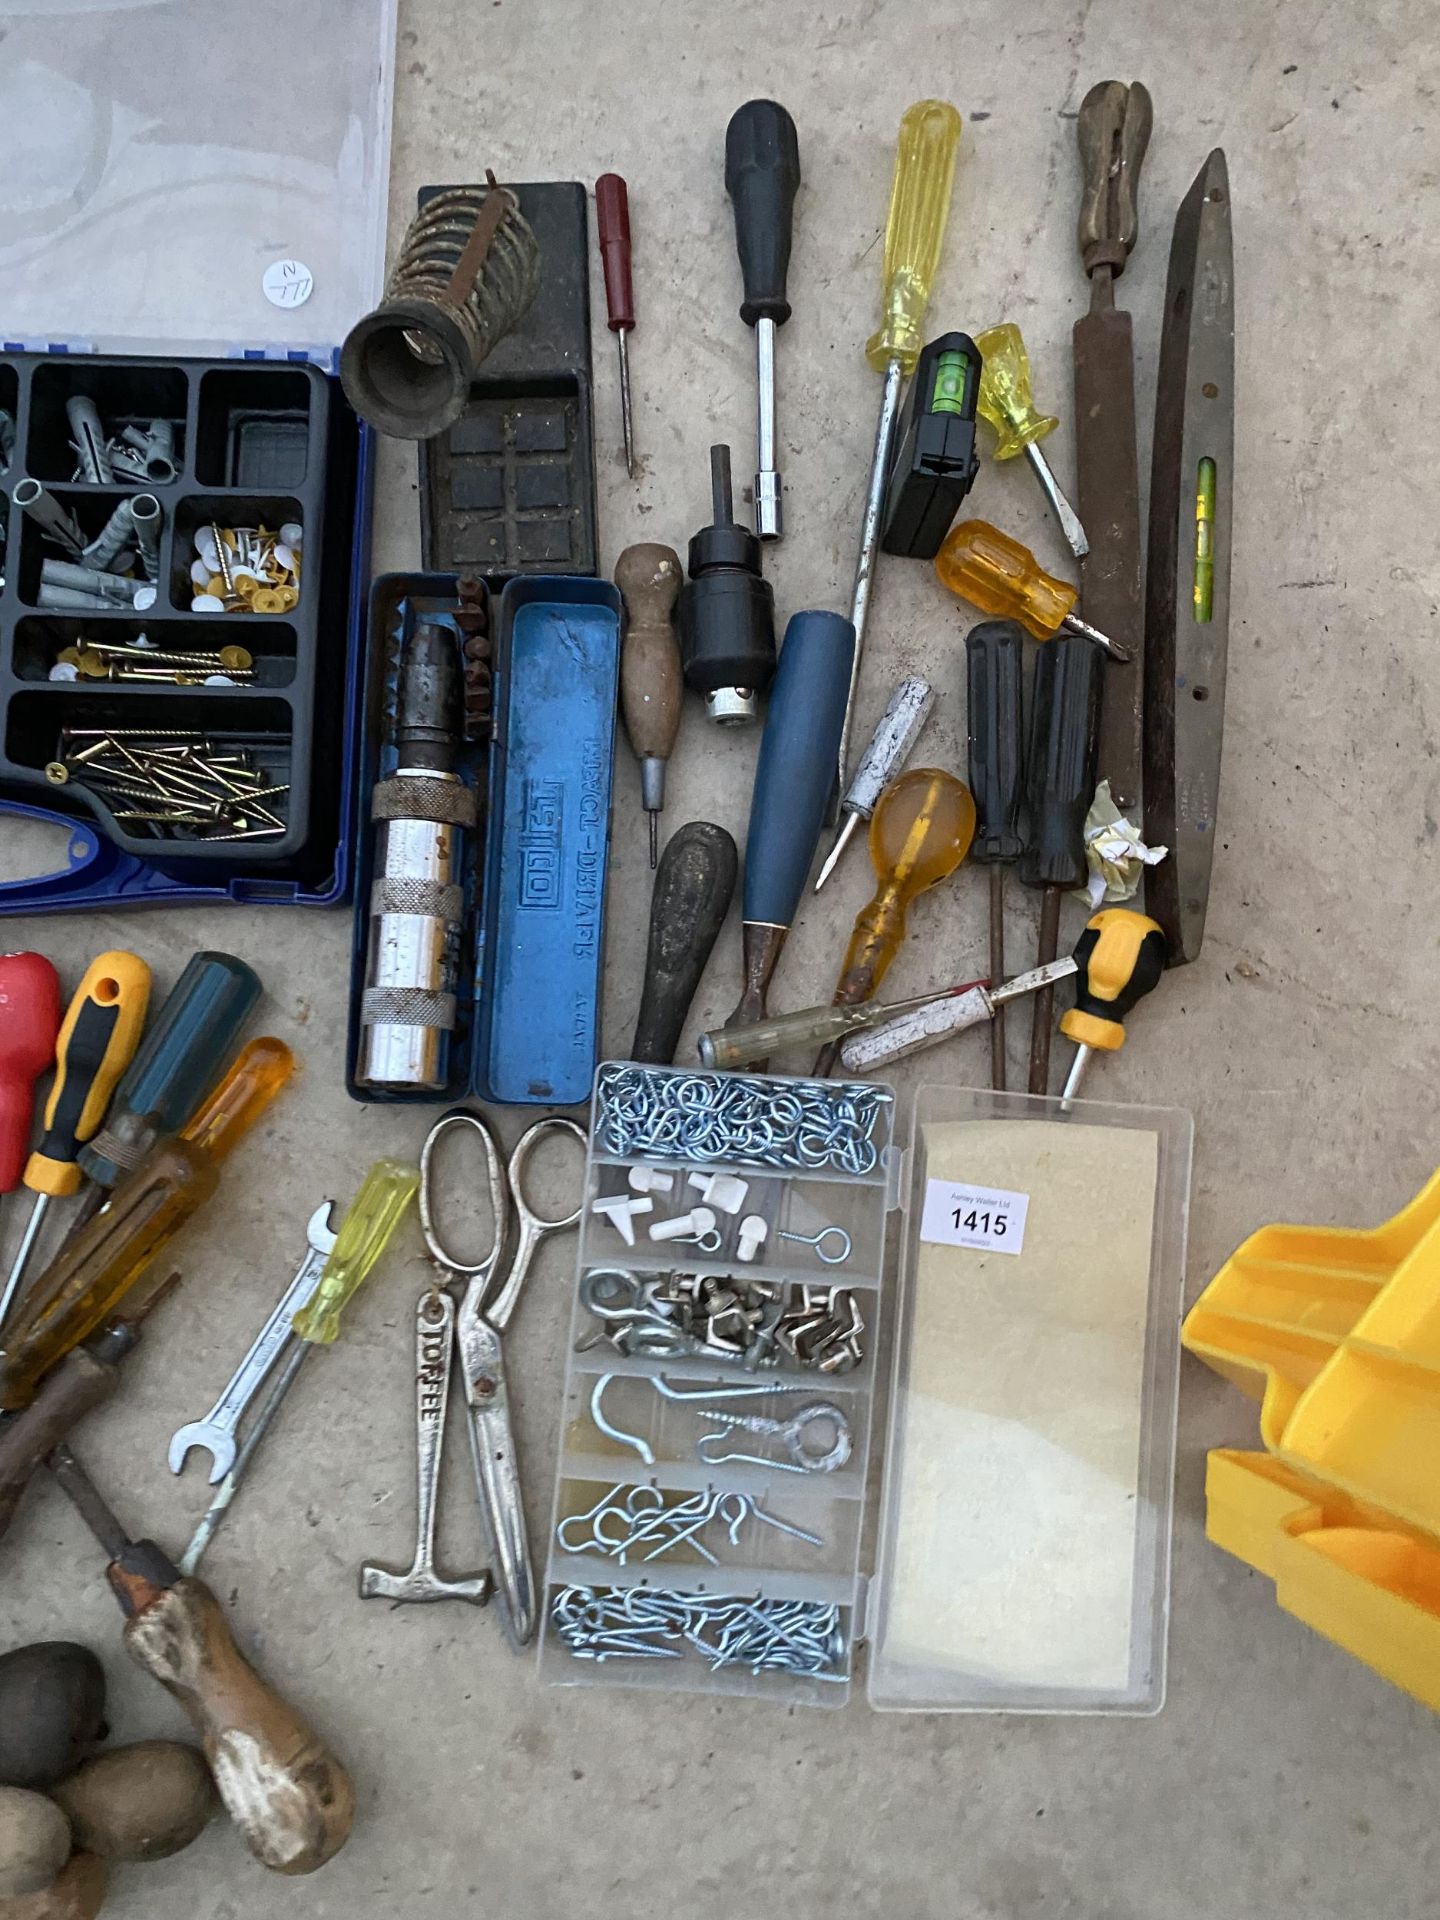 AN ASSORTMENT OF TOOLS AND HARDWARE TO INCLUDE SCREWS, A HAMMER, A SOLDERING IRON AND SCREW - Image 2 of 3